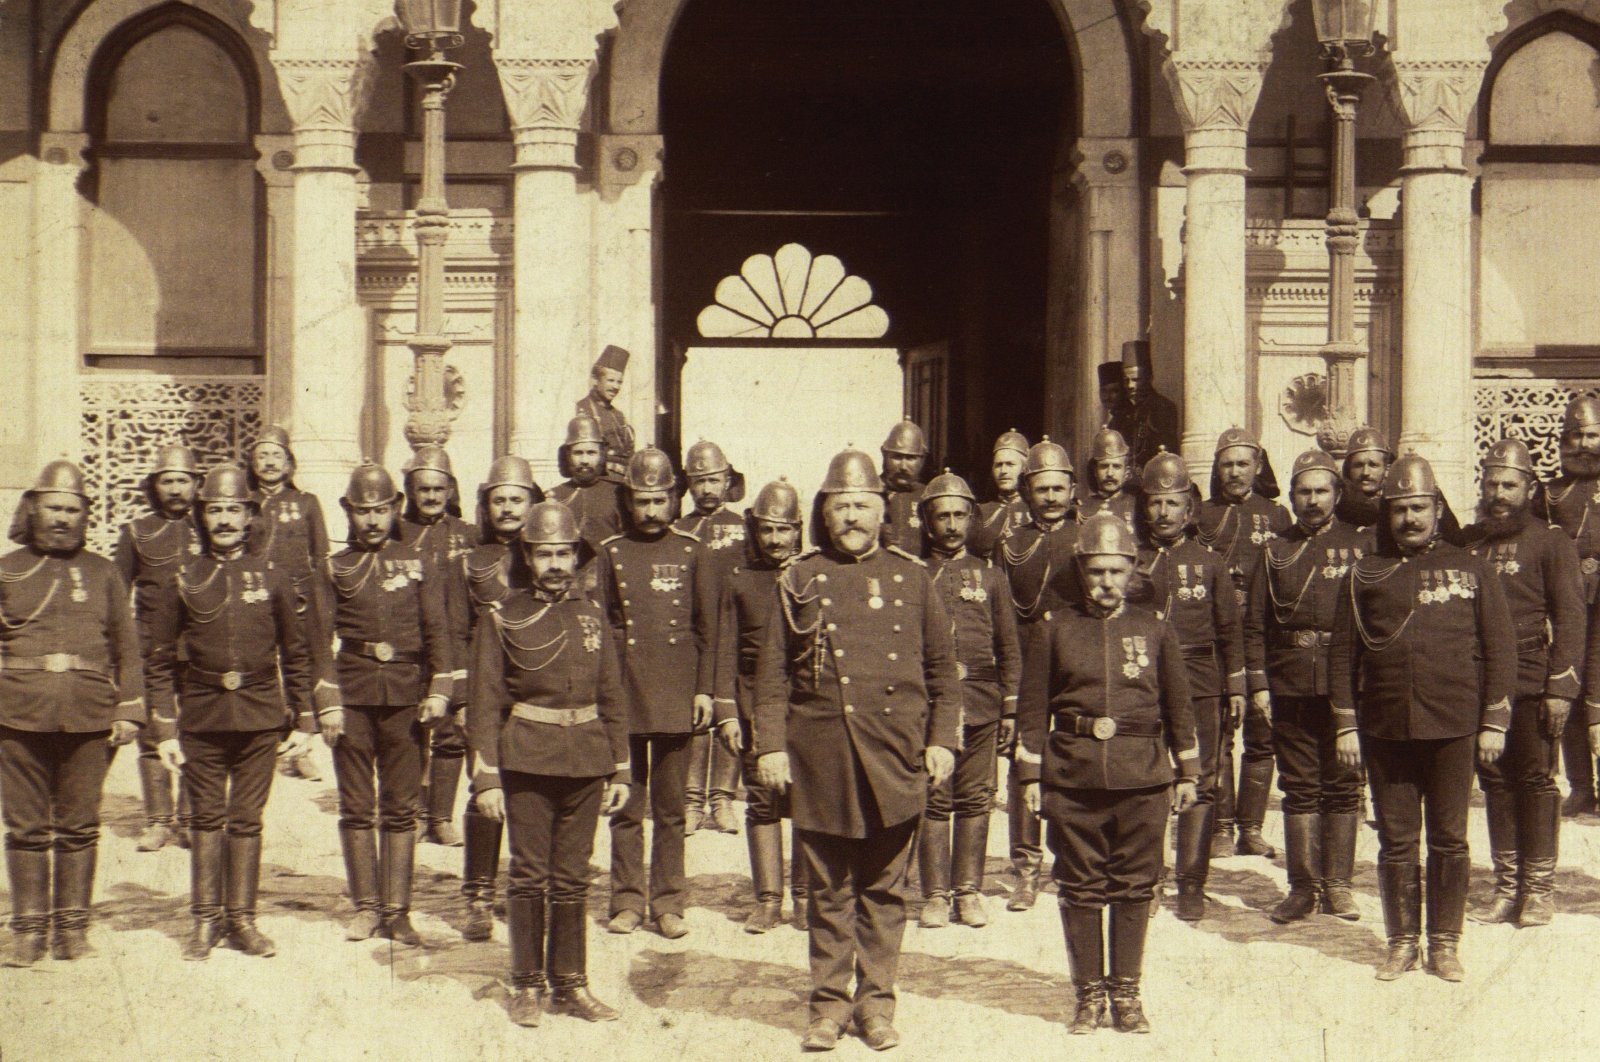 A photo from &quot;A Host Country: Hungarian Emigration to the Turkish Empire&quot; exhibition, Istanbul, Türkiye. (Photo courtesy of Liszt Institute Hungarian Cultural Center)